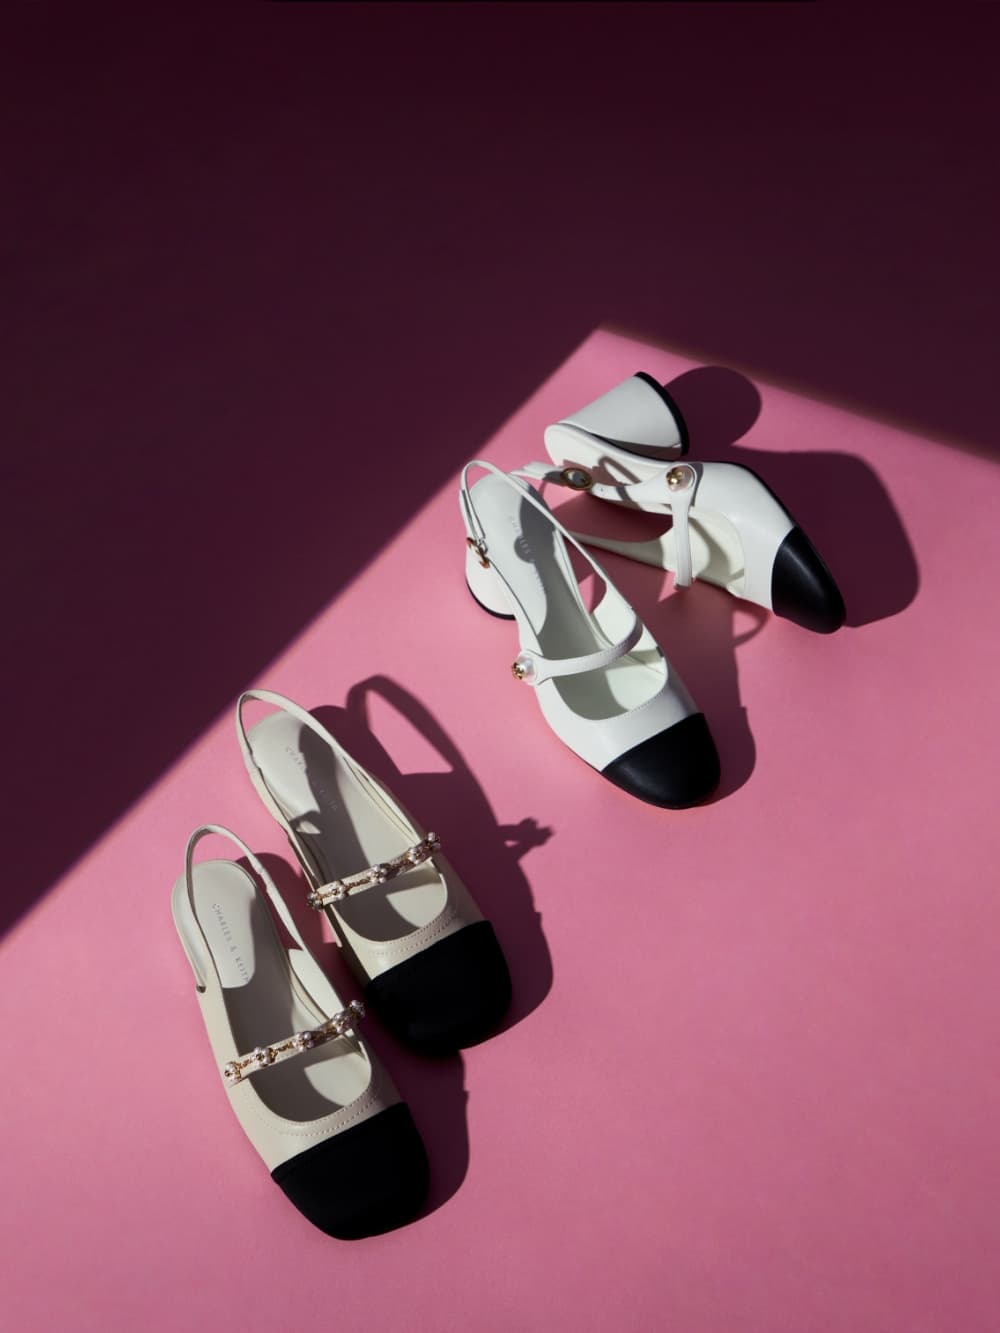 Women’s white double strap see-through mules - CHARLES & KEITH